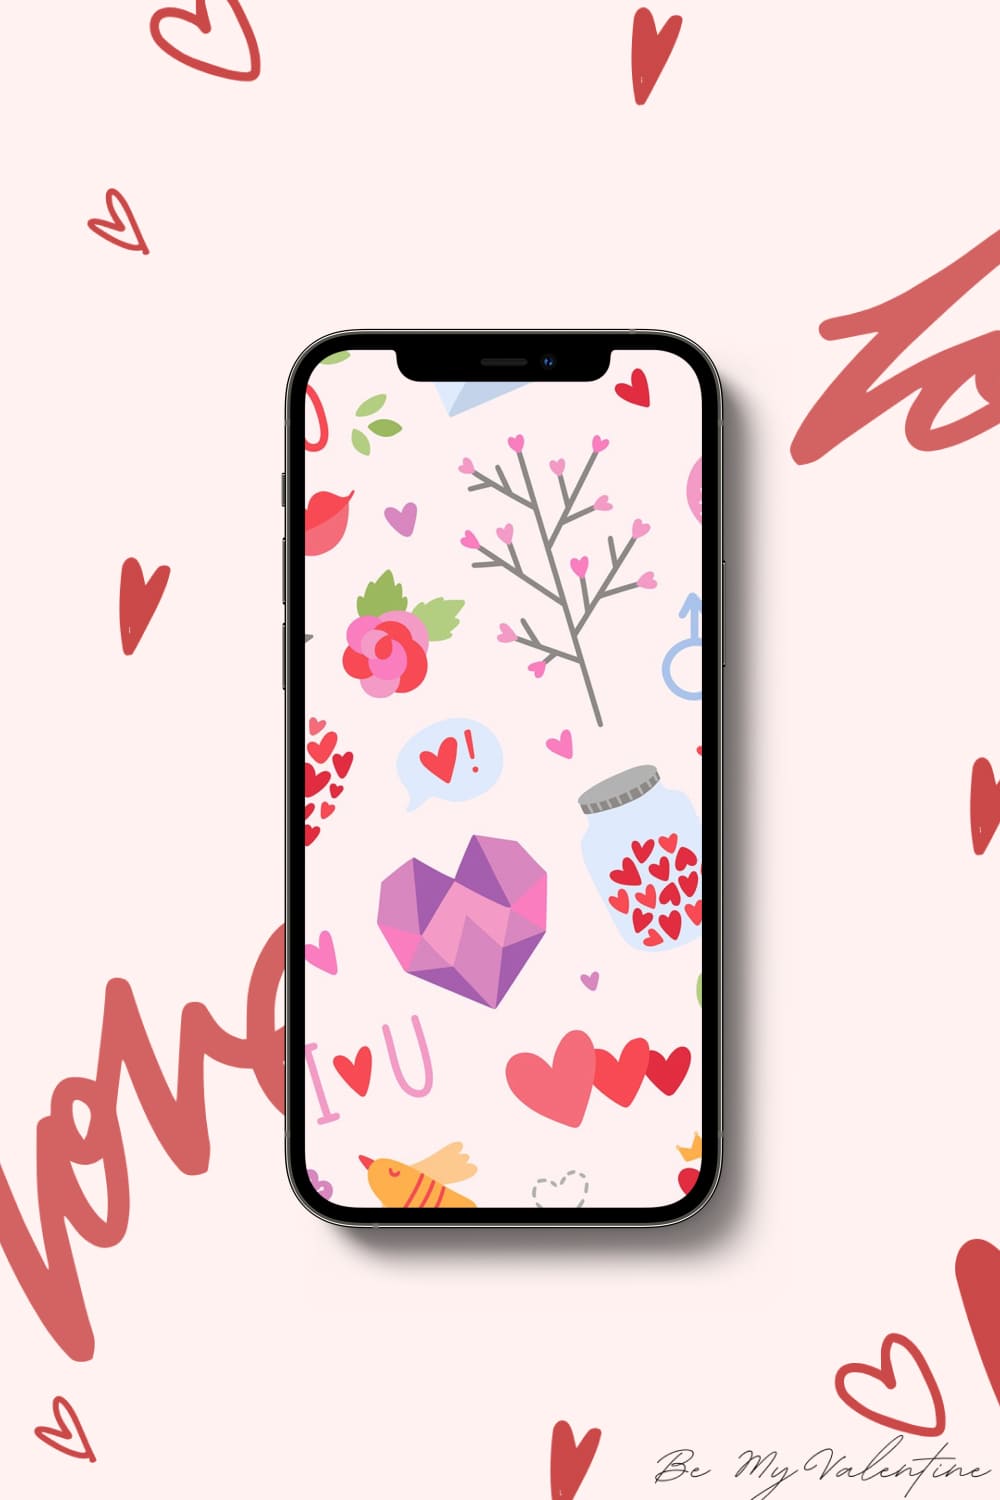 Be My Valentine - phone preview for pinterest.